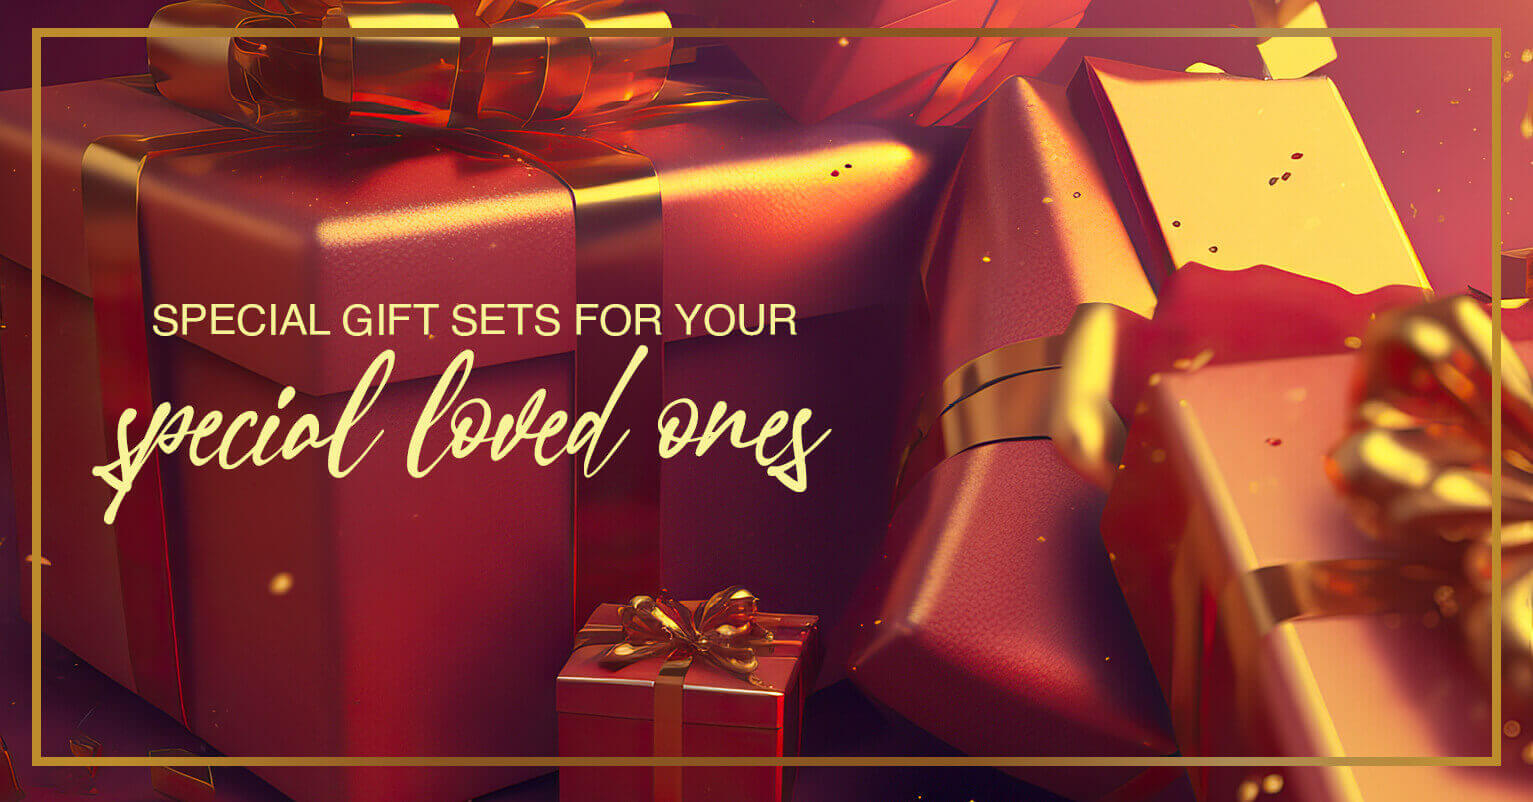 Gift Sets - Make your loved ones feel special